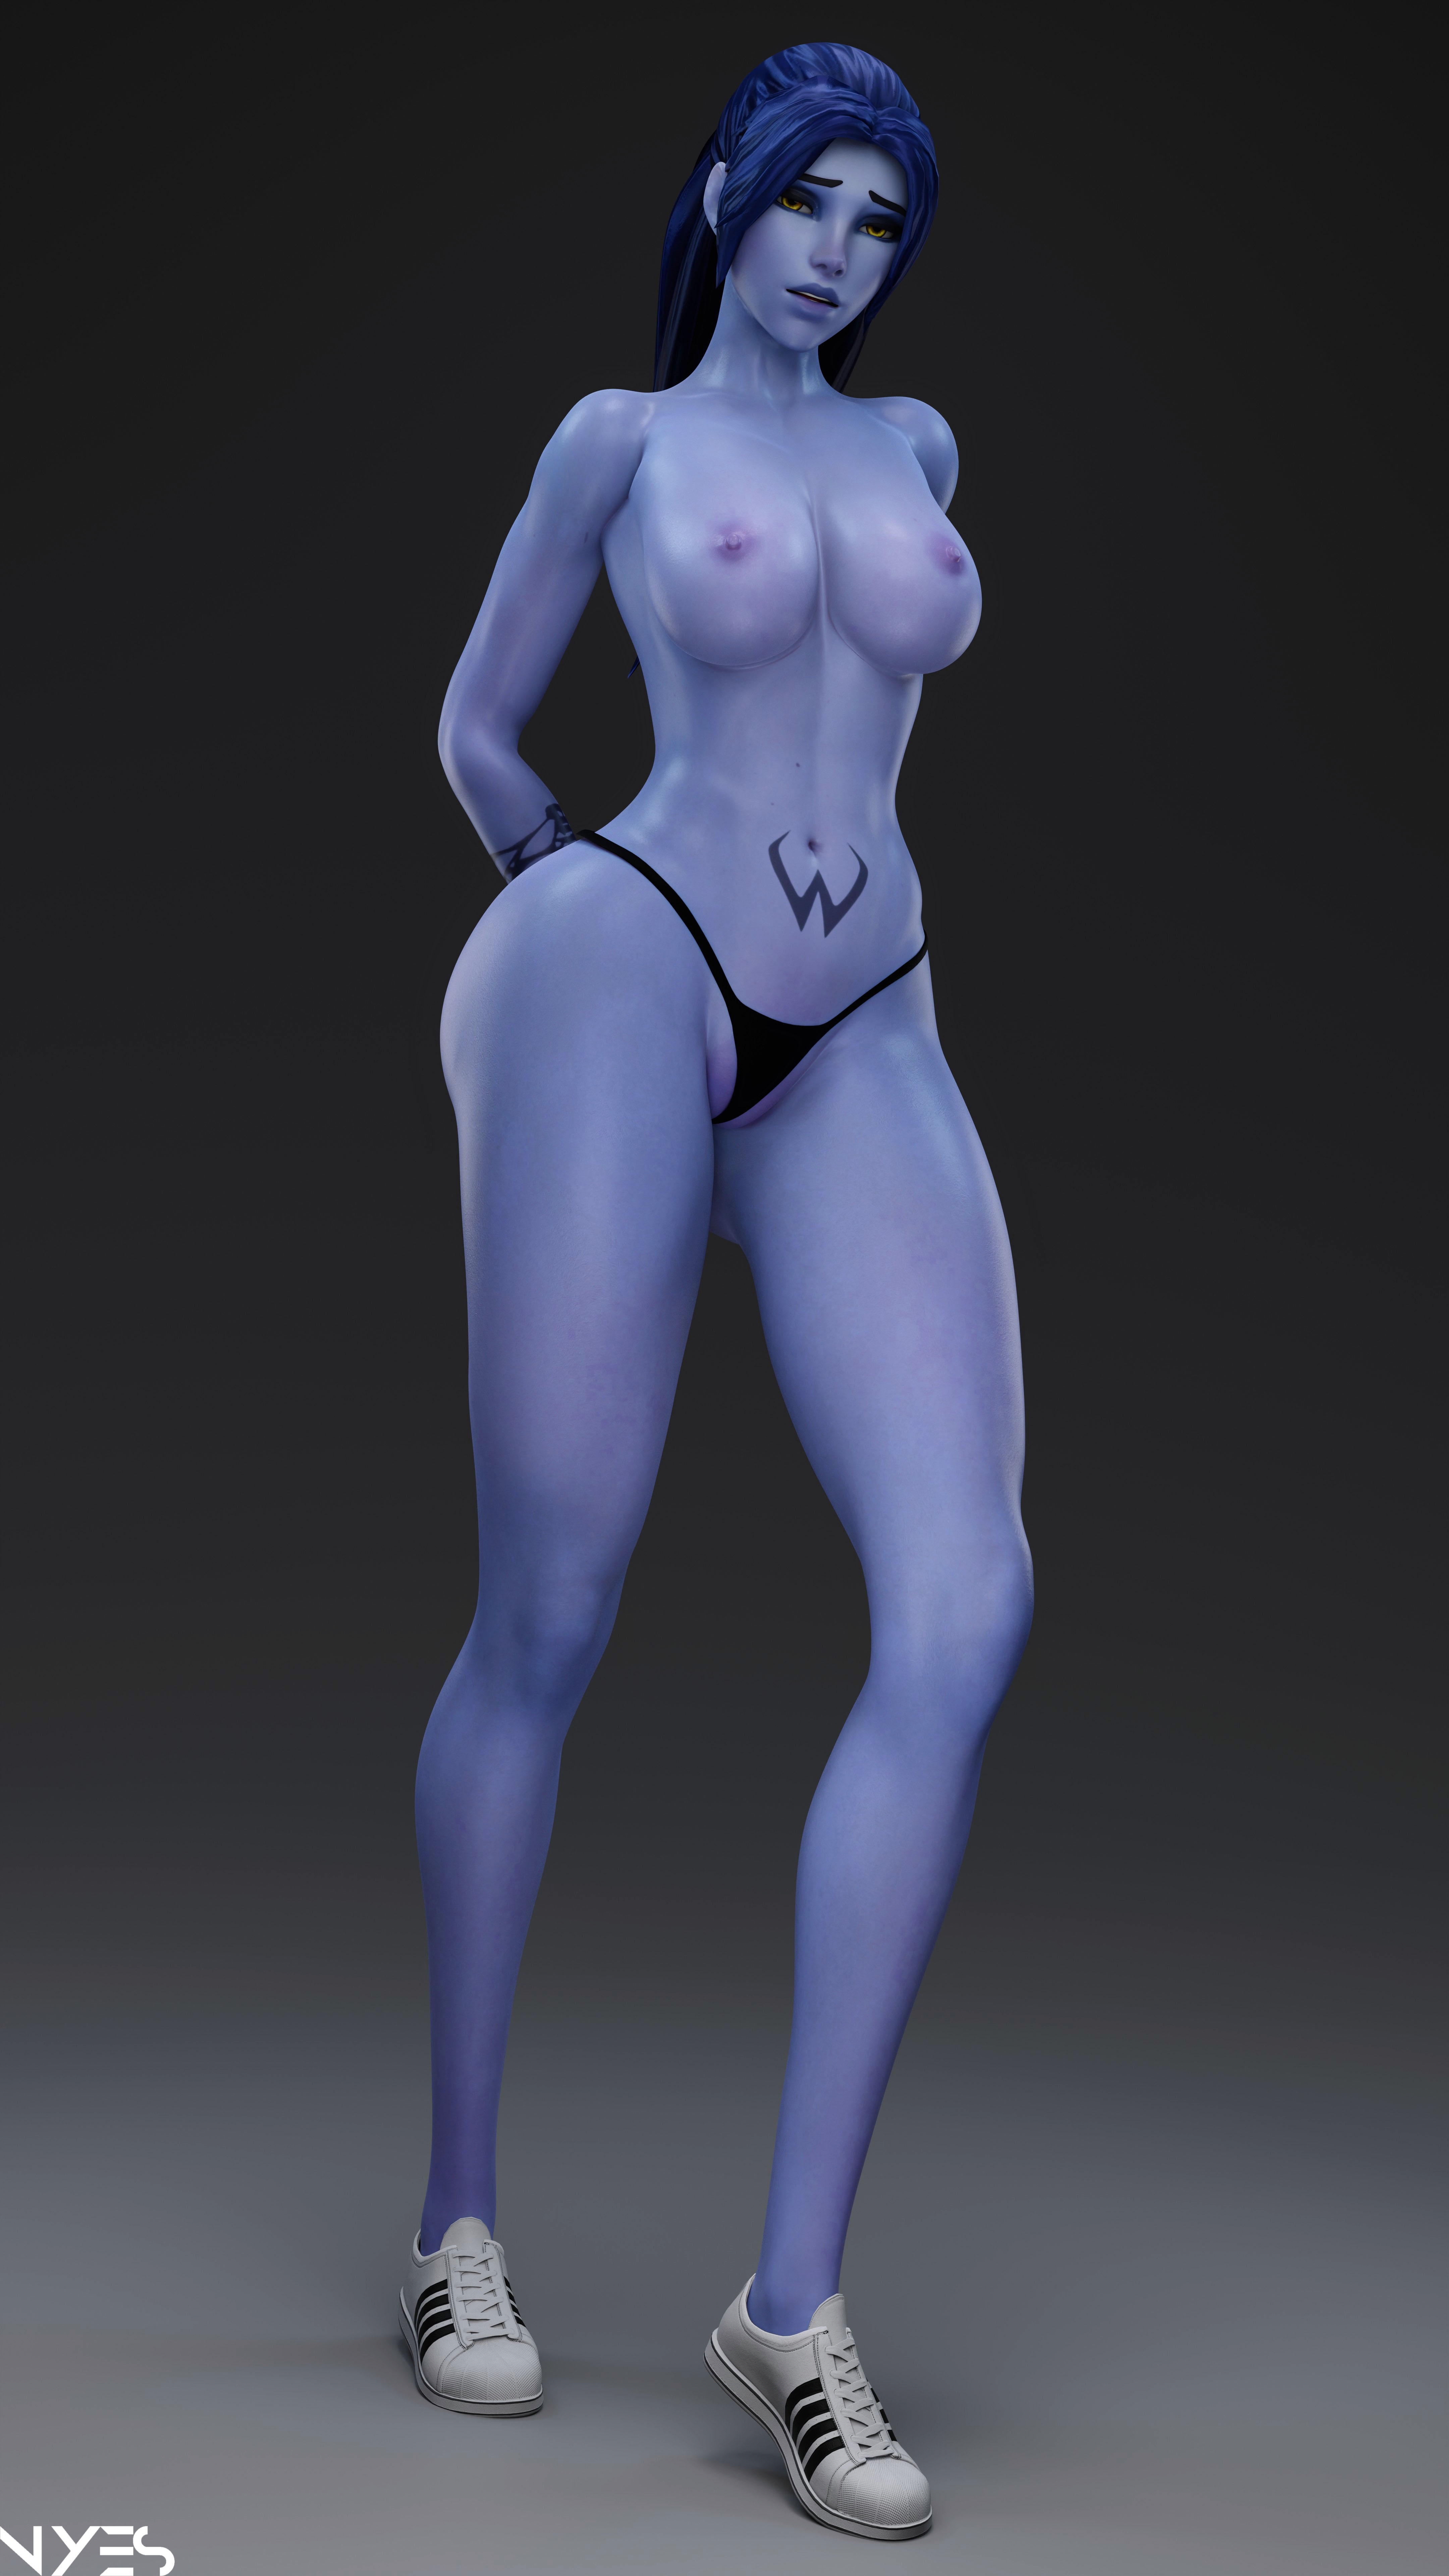 Widowmaker (8K) Widowmaker Overwatch Partially_clothed Shoes Panties Posing Pinup